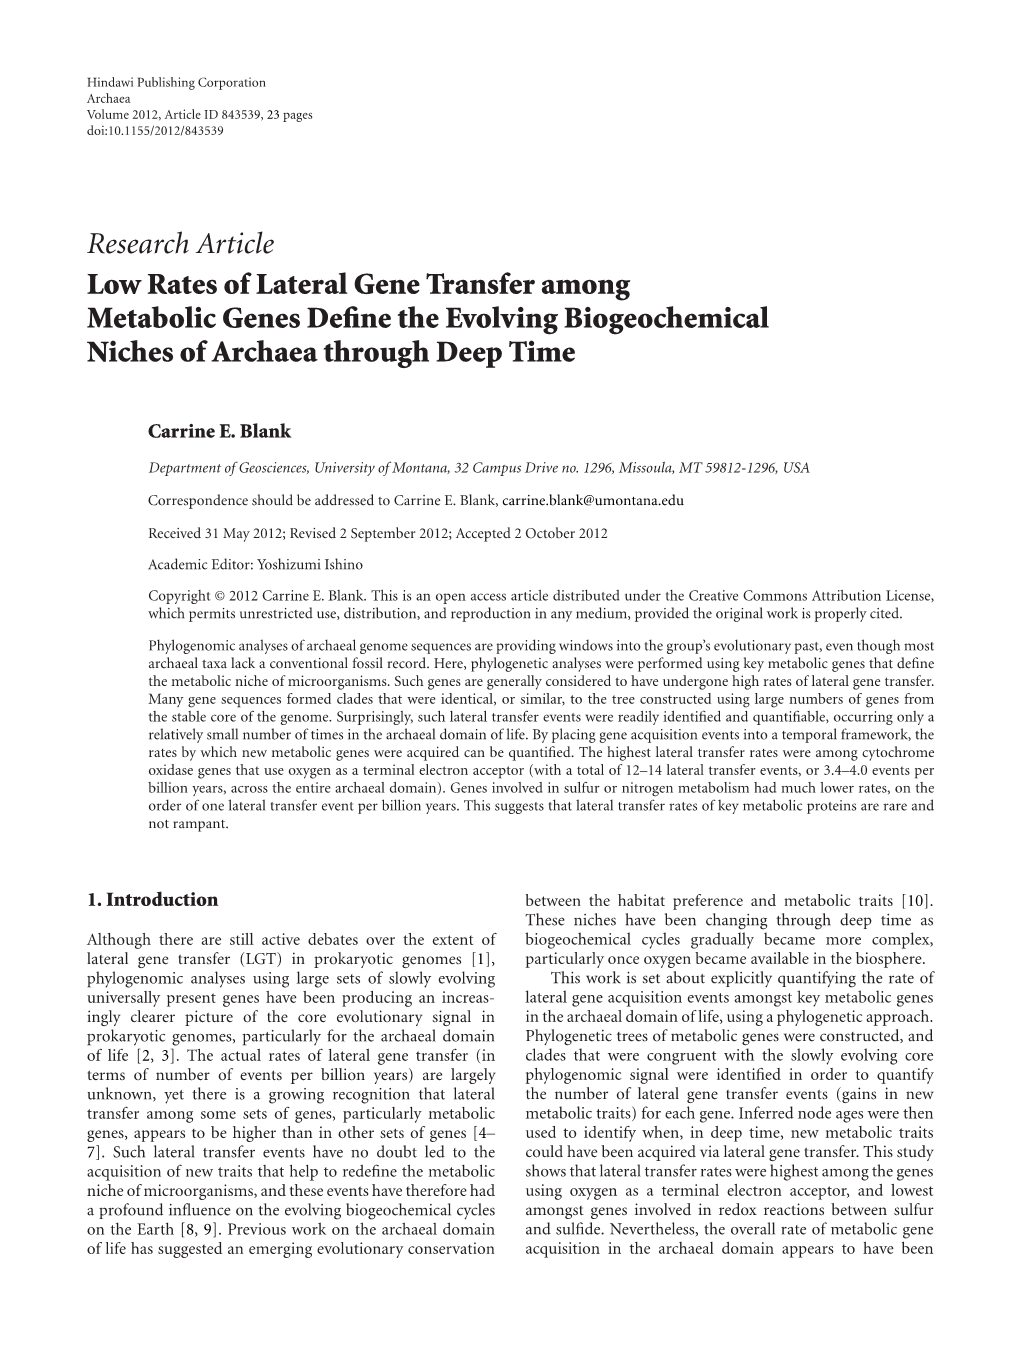 Research Article Low Rates of Lateral Gene Transfer Among Metabolic Genes Deﬁne the Evolving Biogeochemical Niches of Archaea Through Deep Time